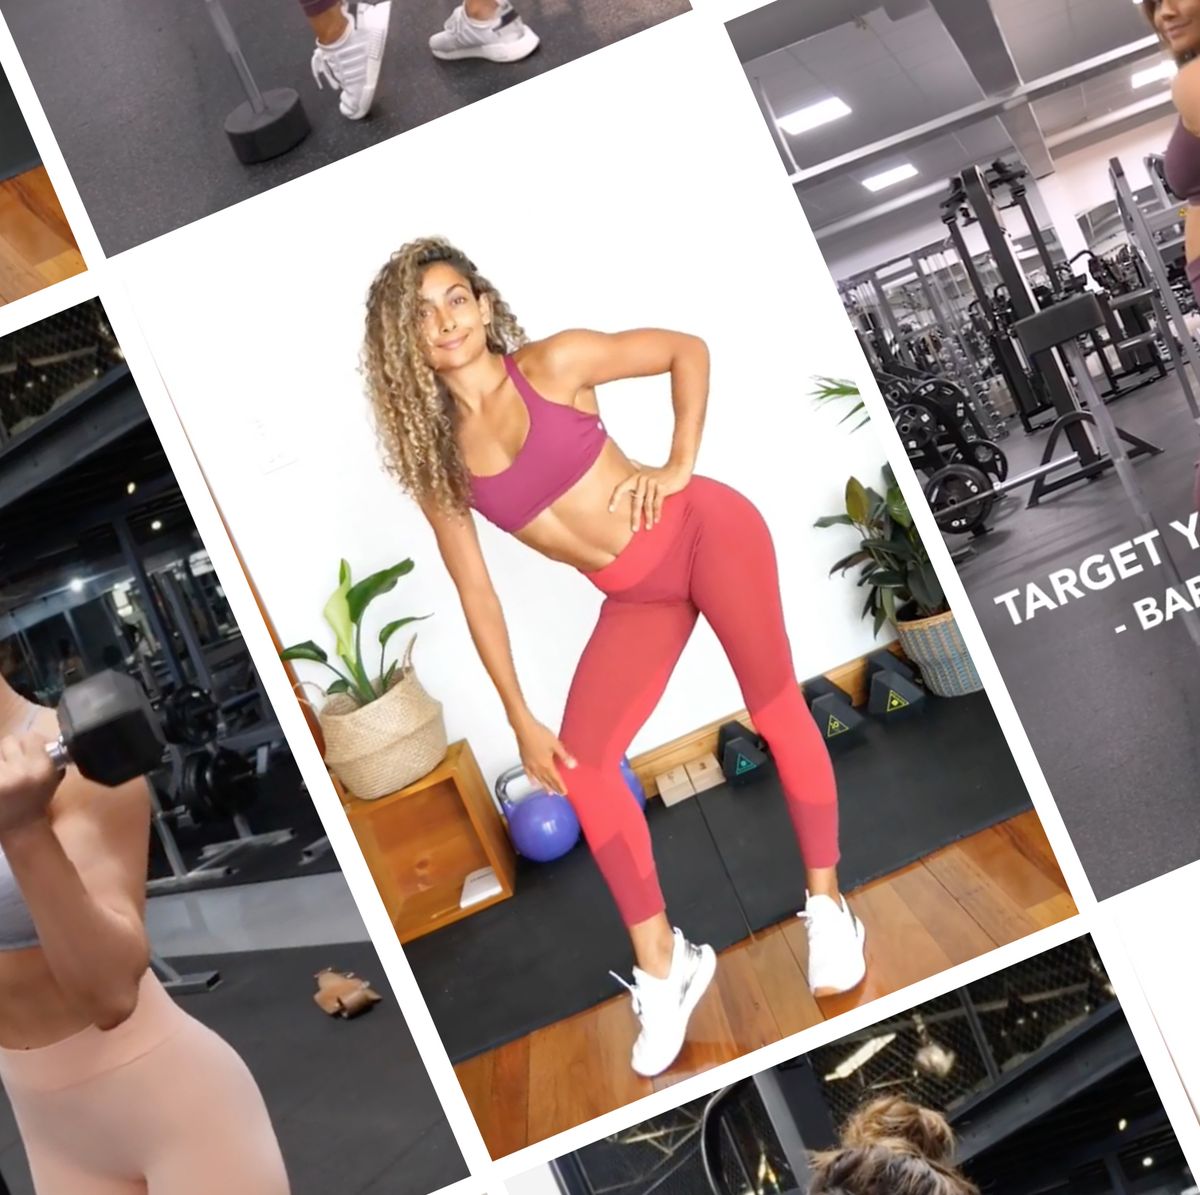 Famous Fitness Influencers To Look Out For